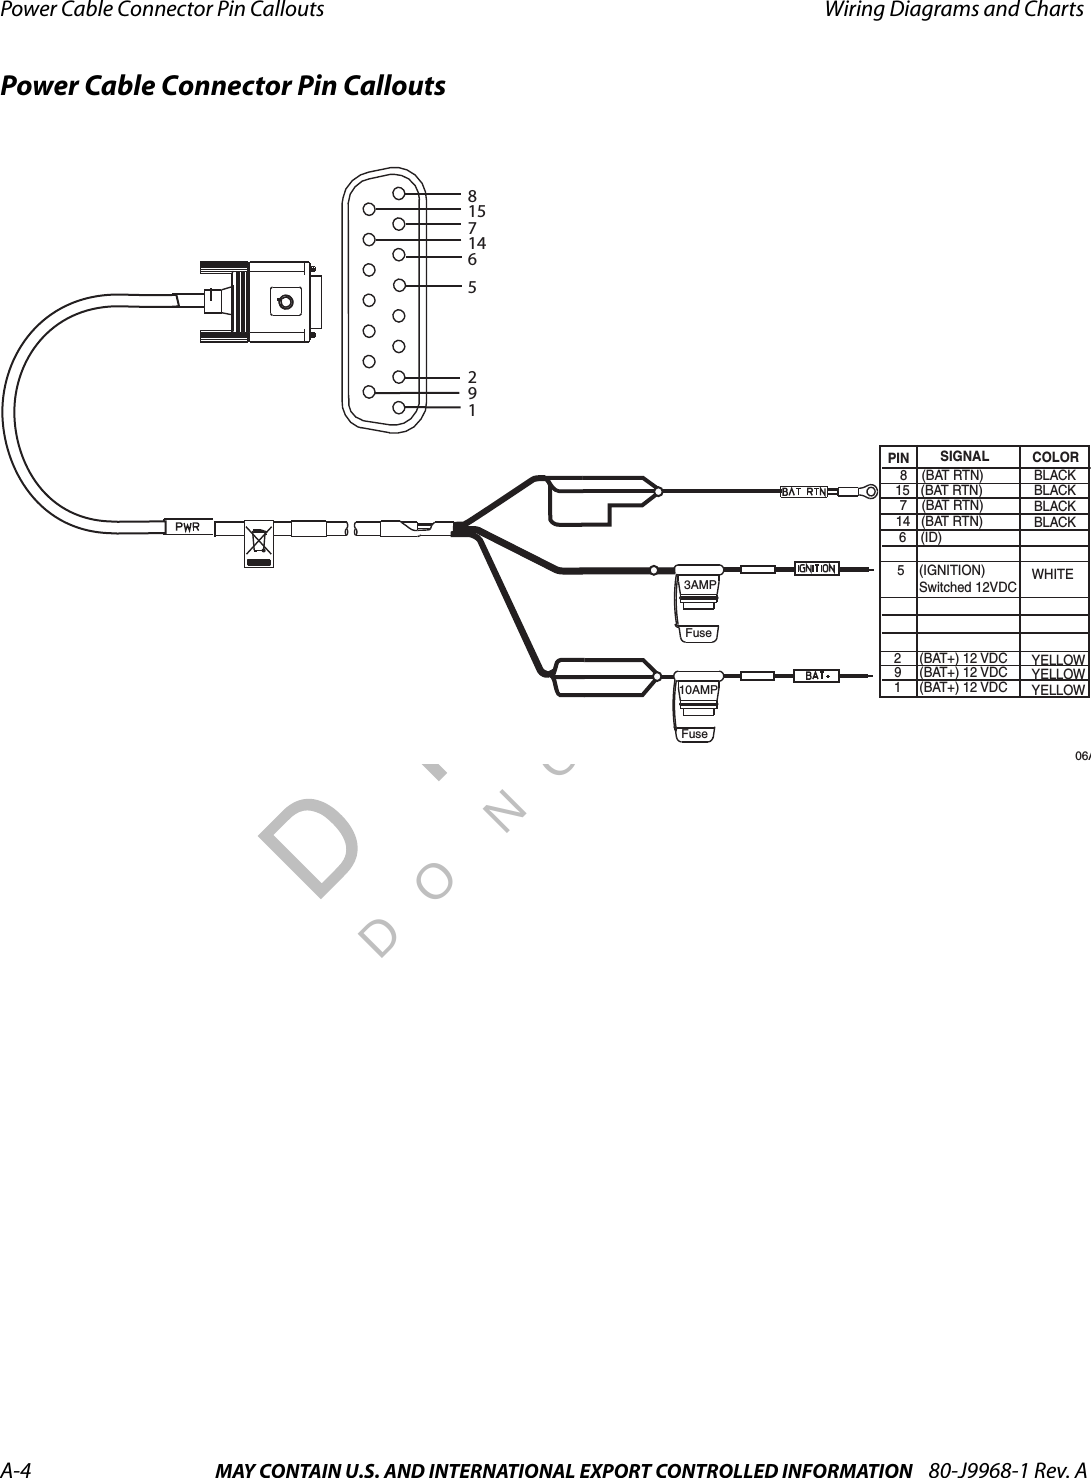 Power Cable Connector Pin Callouts Wiring Diagrams and ChartsA-4 MAY CONTAIN U.S. AND INTERNATIONAL EXPORT CONTROLLED INFORMATION 80-J9968-1 Rev. ADO NOT COPYPower Cable Connector Pin Callouts1     (BAT+) 12 VDC2     (BAT+) 12 VDC8    (BAT RTN)5    (IGNITION)      Switched 12VDC7    (BAT RTN)6    (ID)SIGNAL COLORPIN15   (BAT RTN) 14   (BAT RTN)9     (BAT+) 12 VDC YELLOWYELLOWYELLOWBLACKBLACKBLACKBLACKWHITE8157146529106A3AMPFuse10AMPFuse